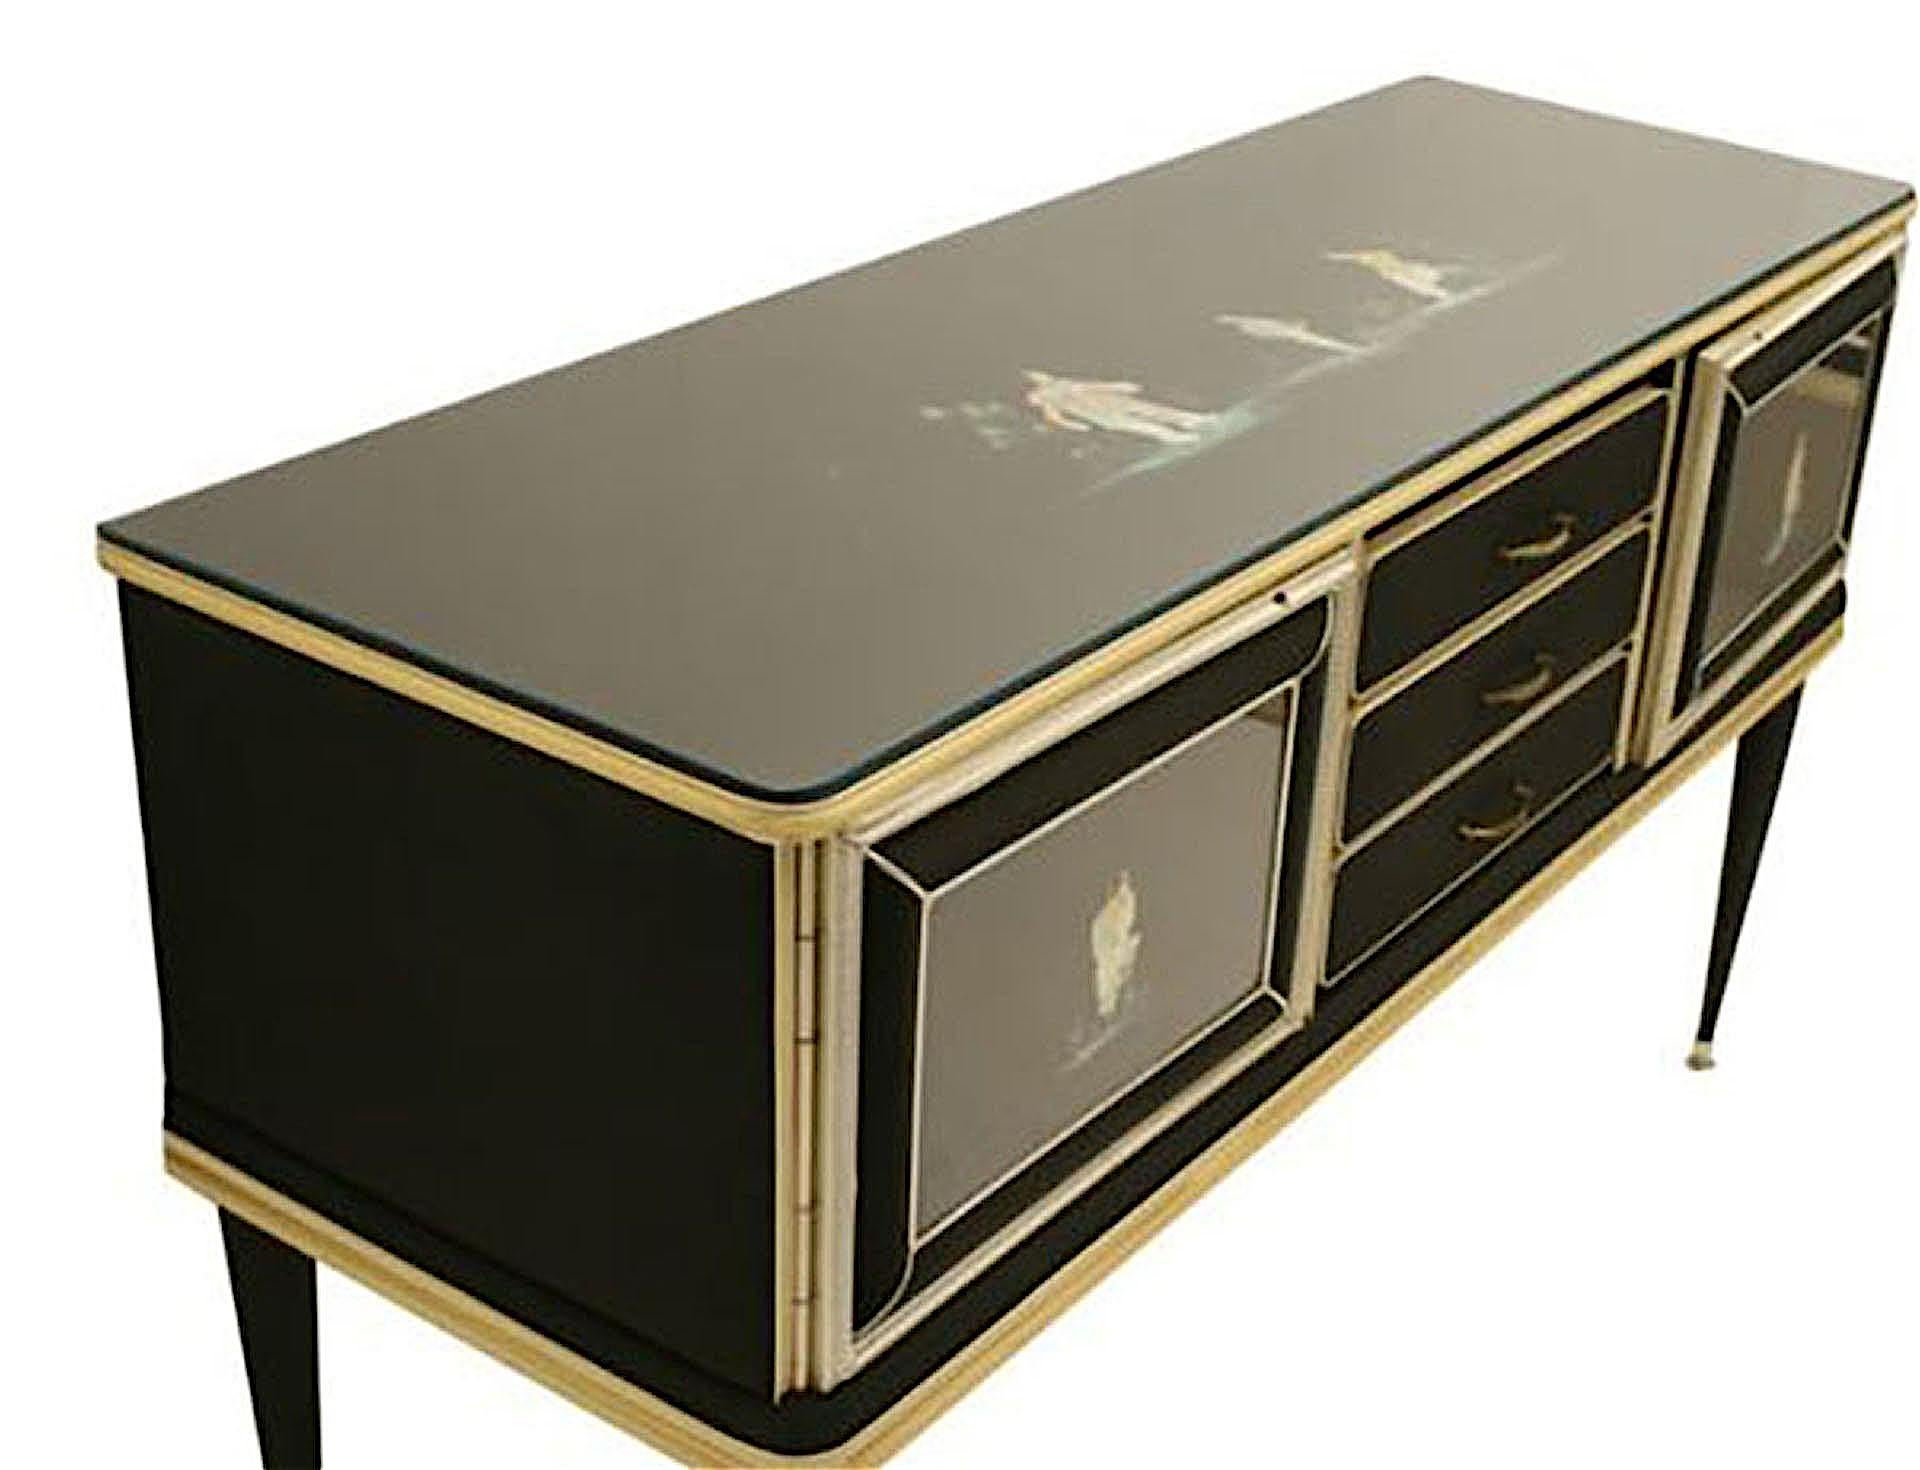 Anodized Umberto Mascagni Italian Mid-Century Chinoiserie Decorated Sideboard For Sale